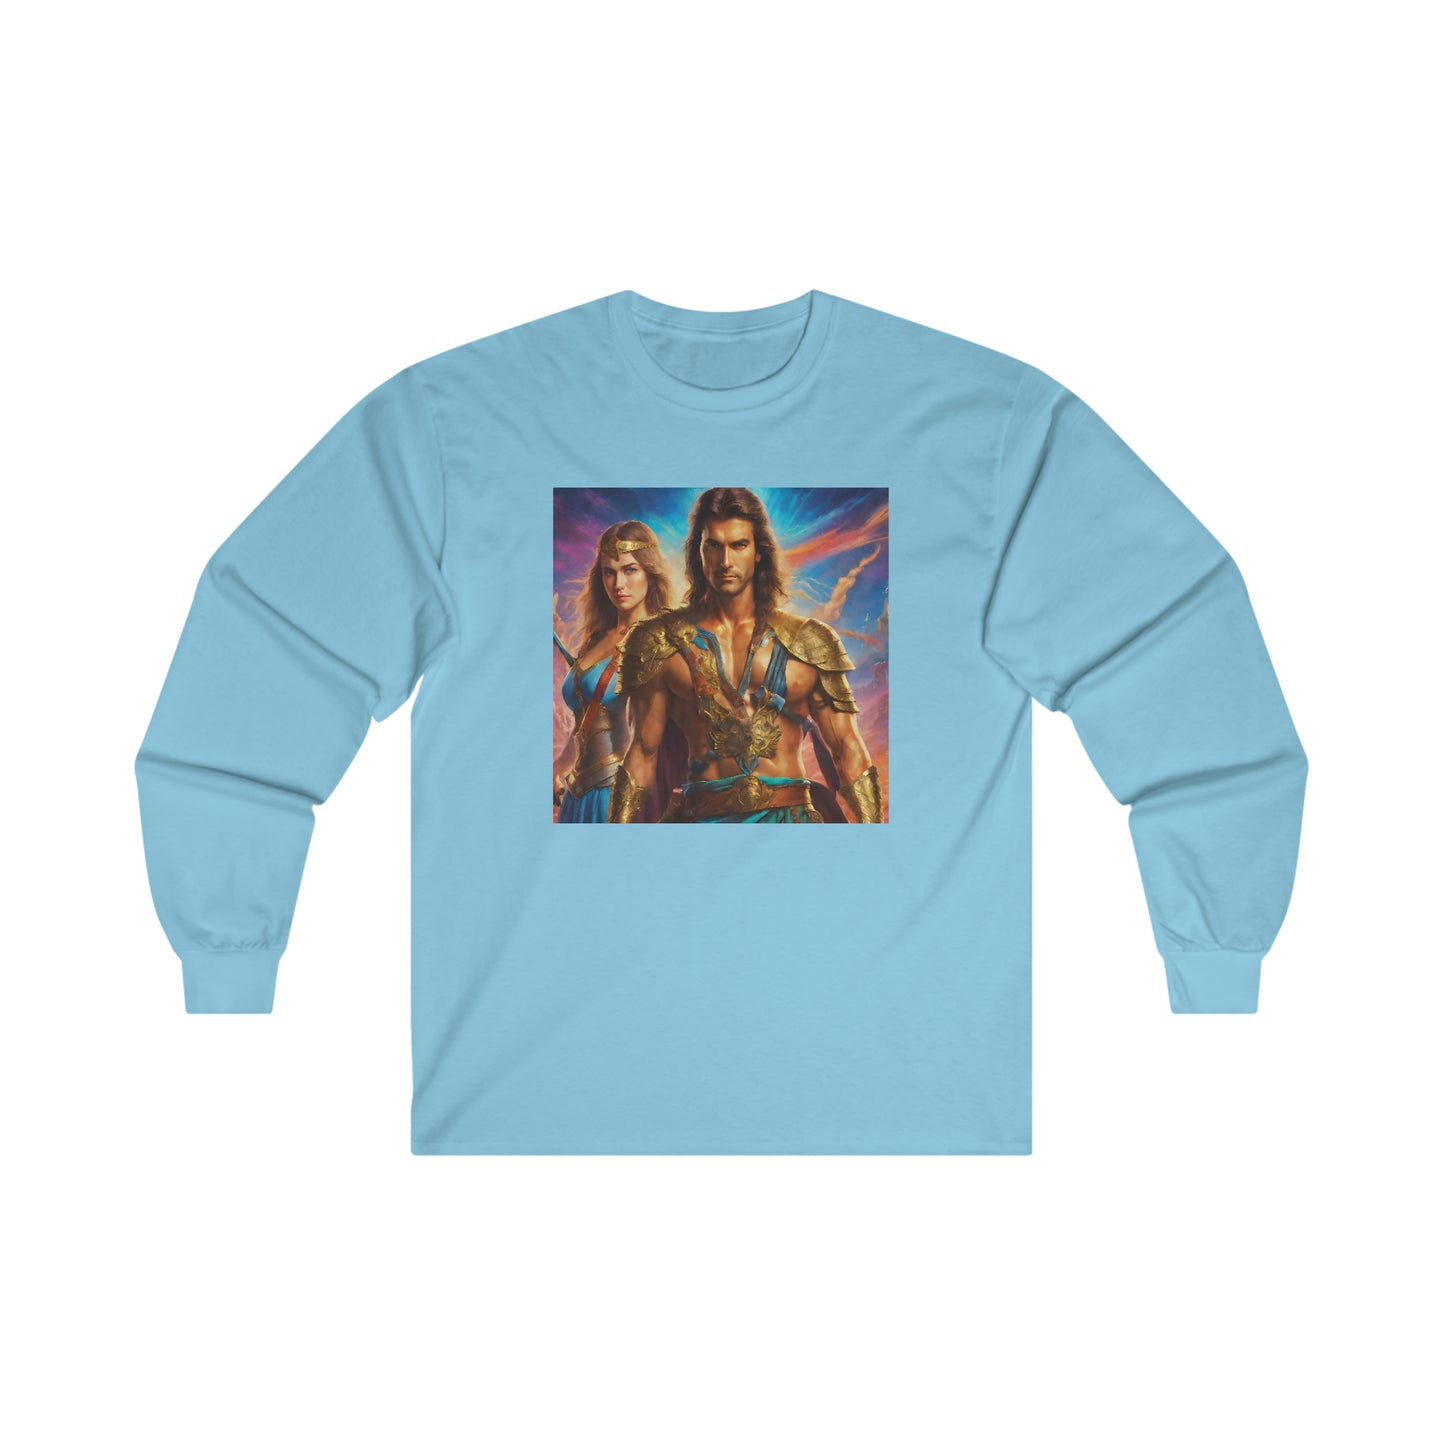 "80s medieval fantasy" Ultra Cotton Long Sleeve Tee